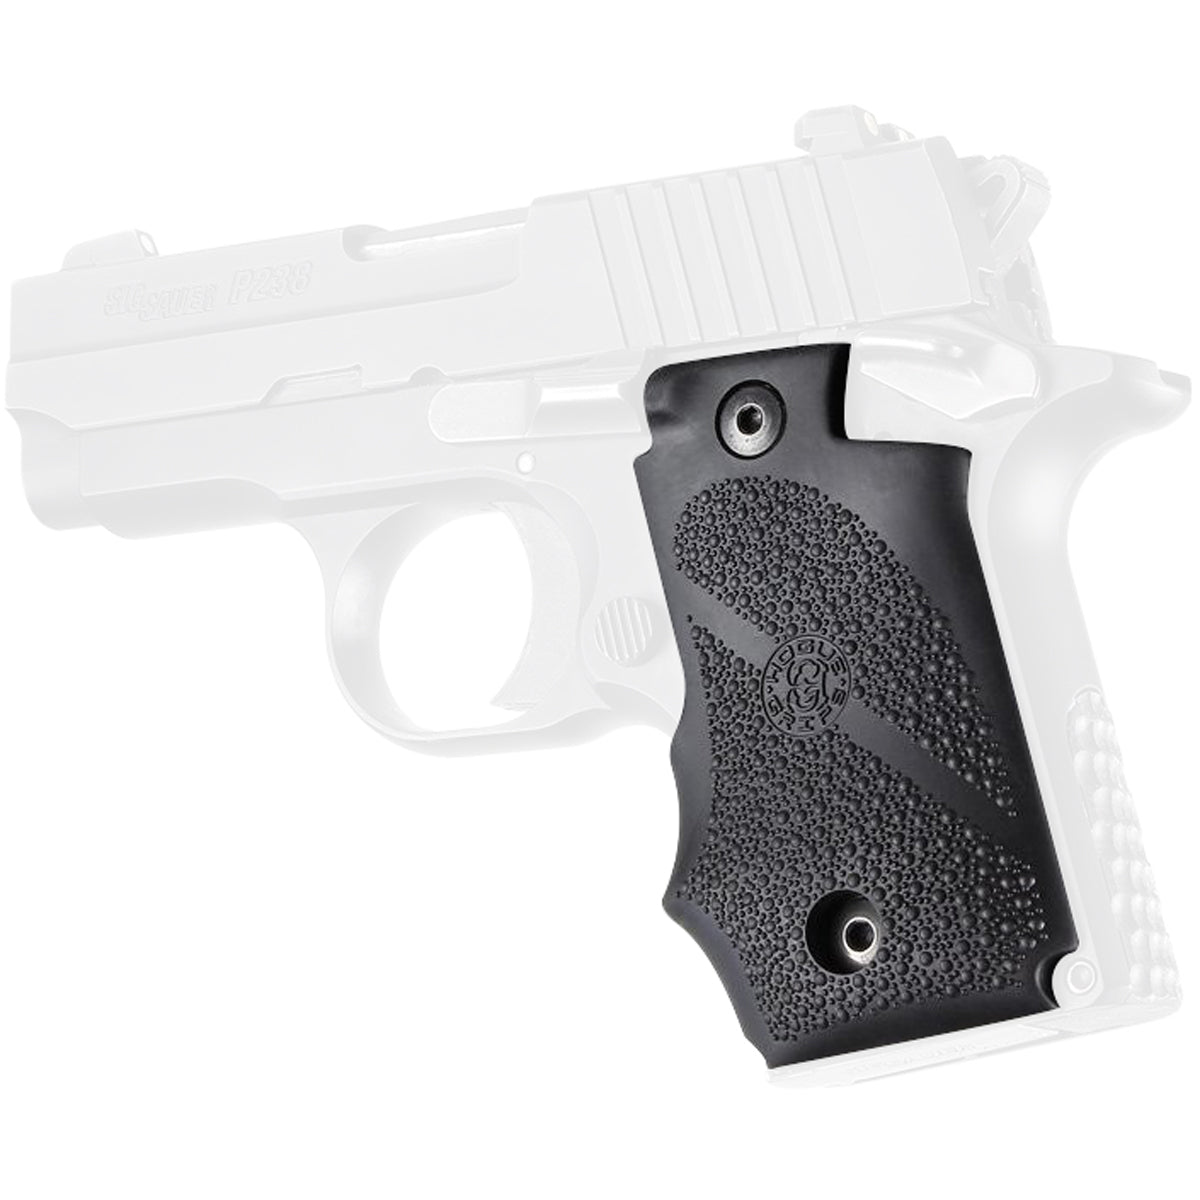 Hogue SIG SAUER P238 Ambi Safety Rubber Grip with Finger Grooves - Black Hogue